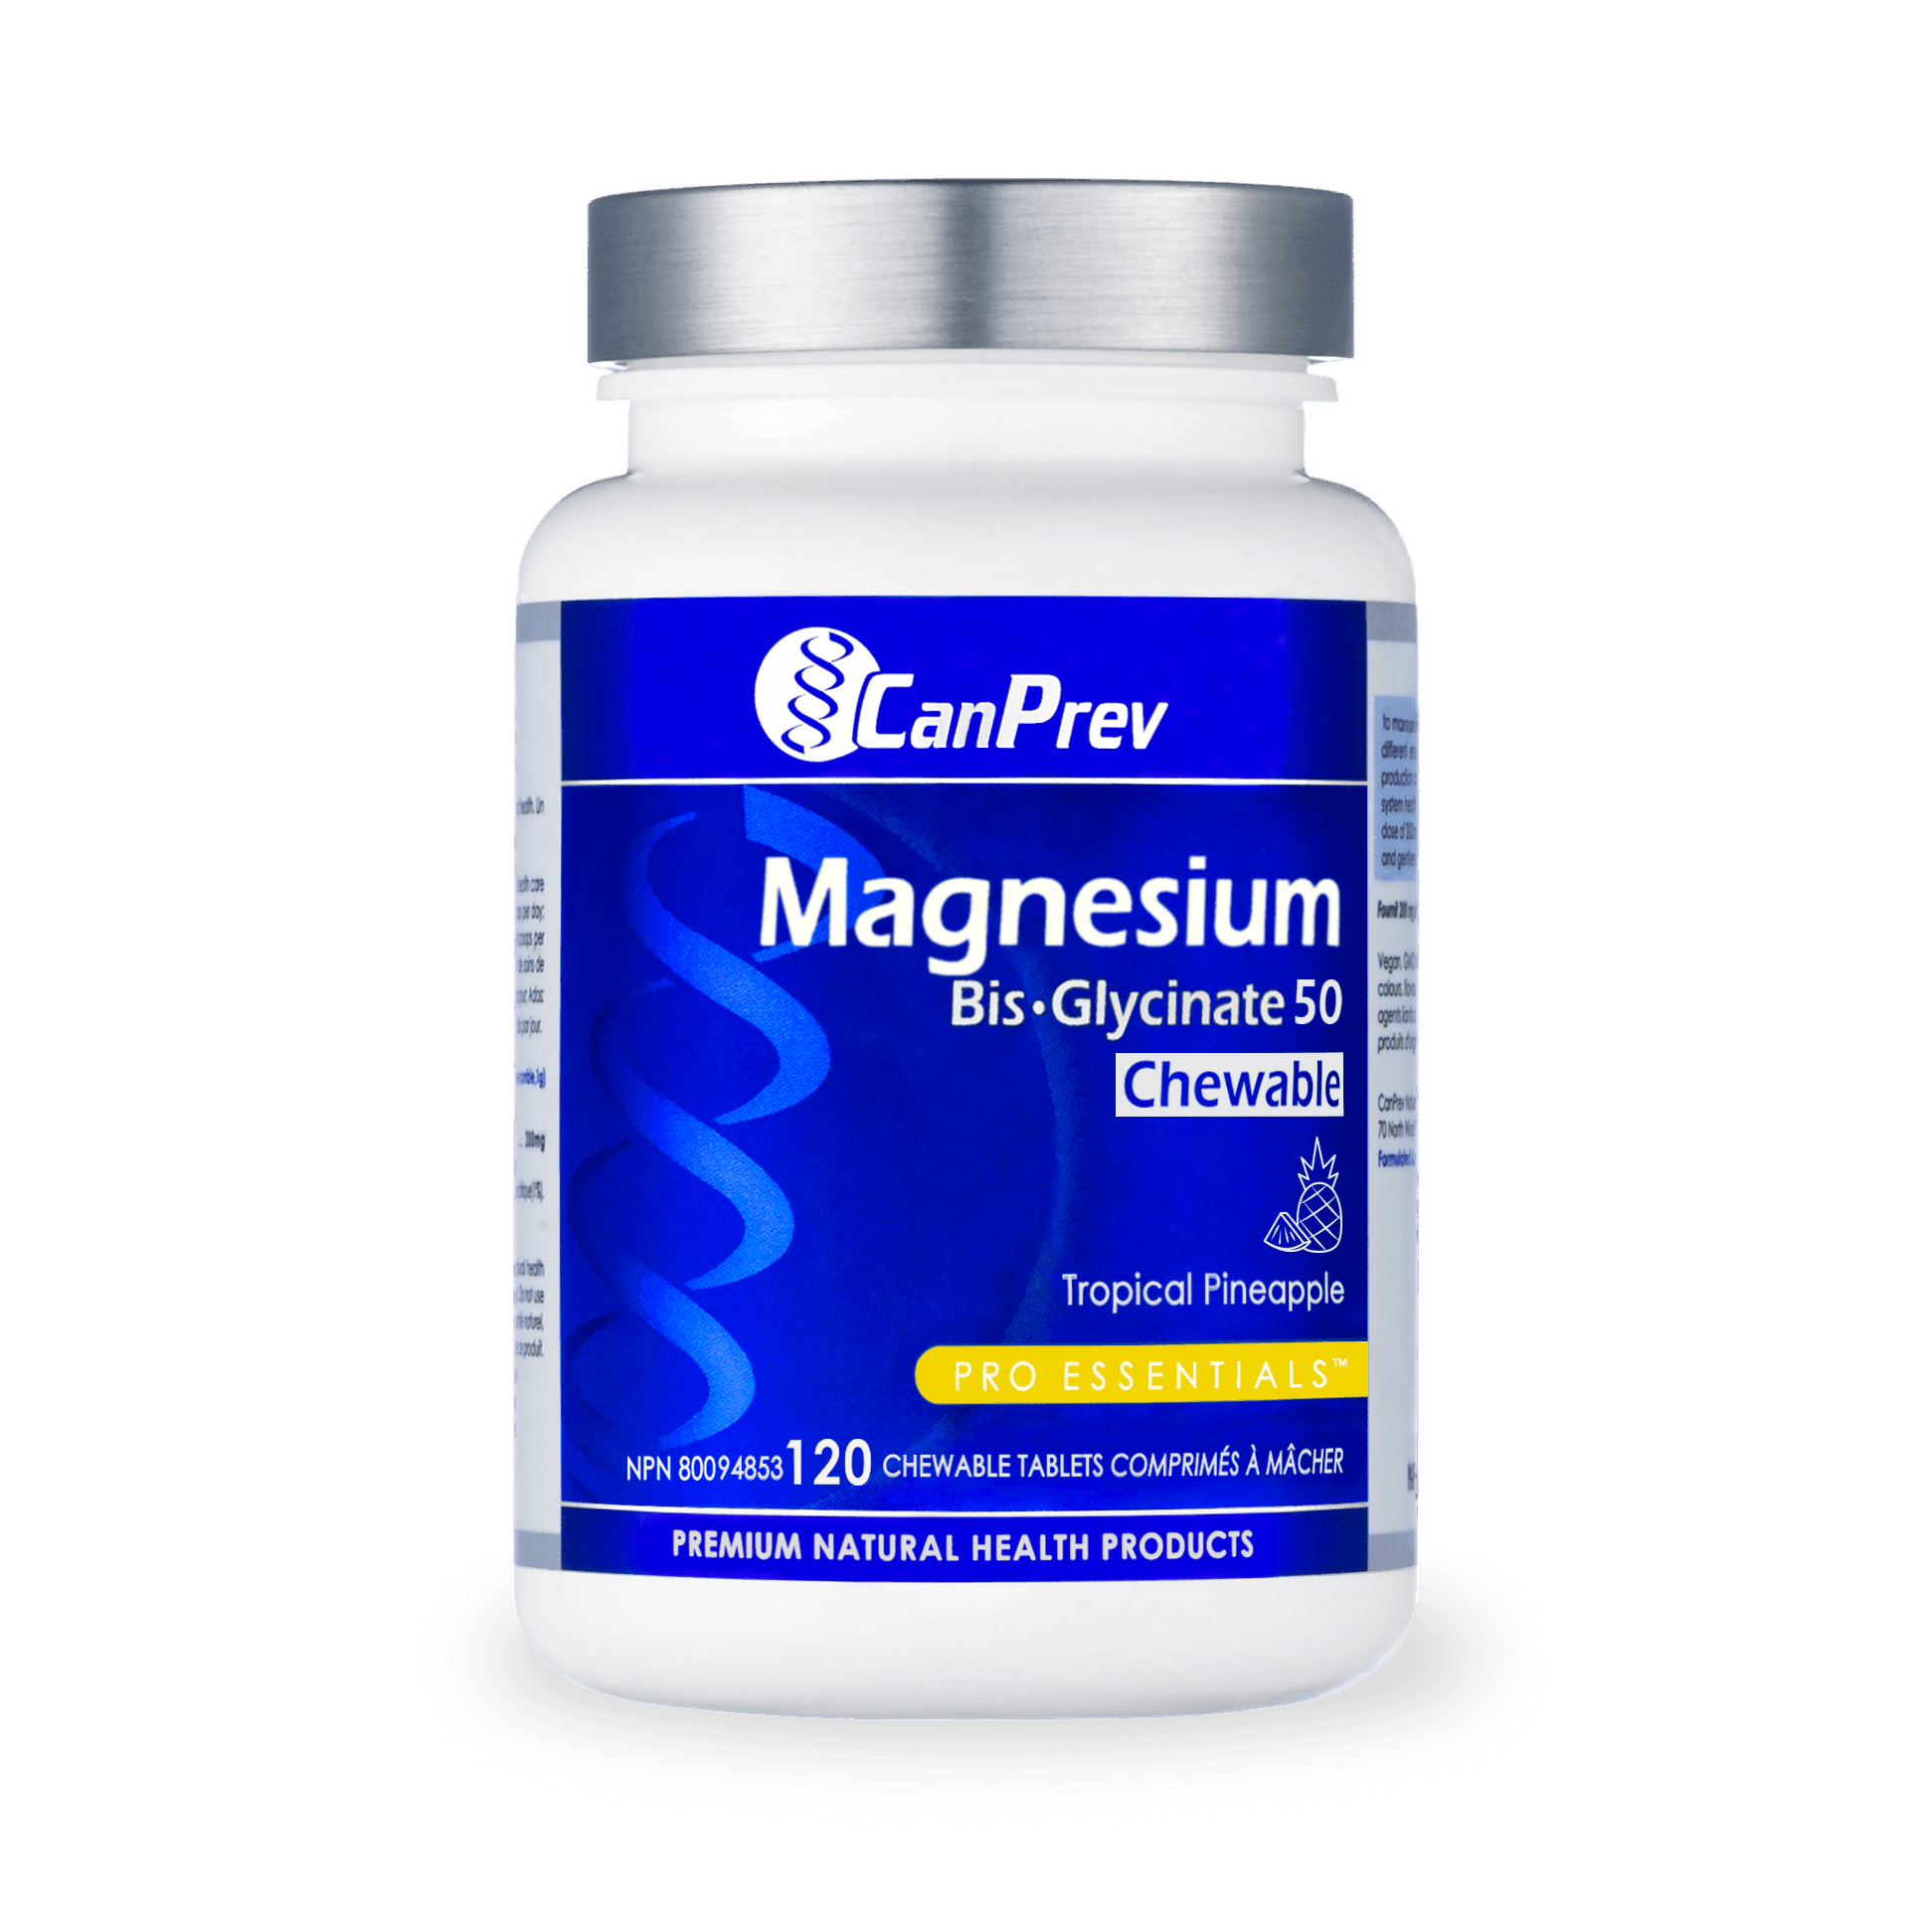 CanPrev Magnesium Bis-Glycinate 50 Tropical Pineapple 120 Chewable Tablets